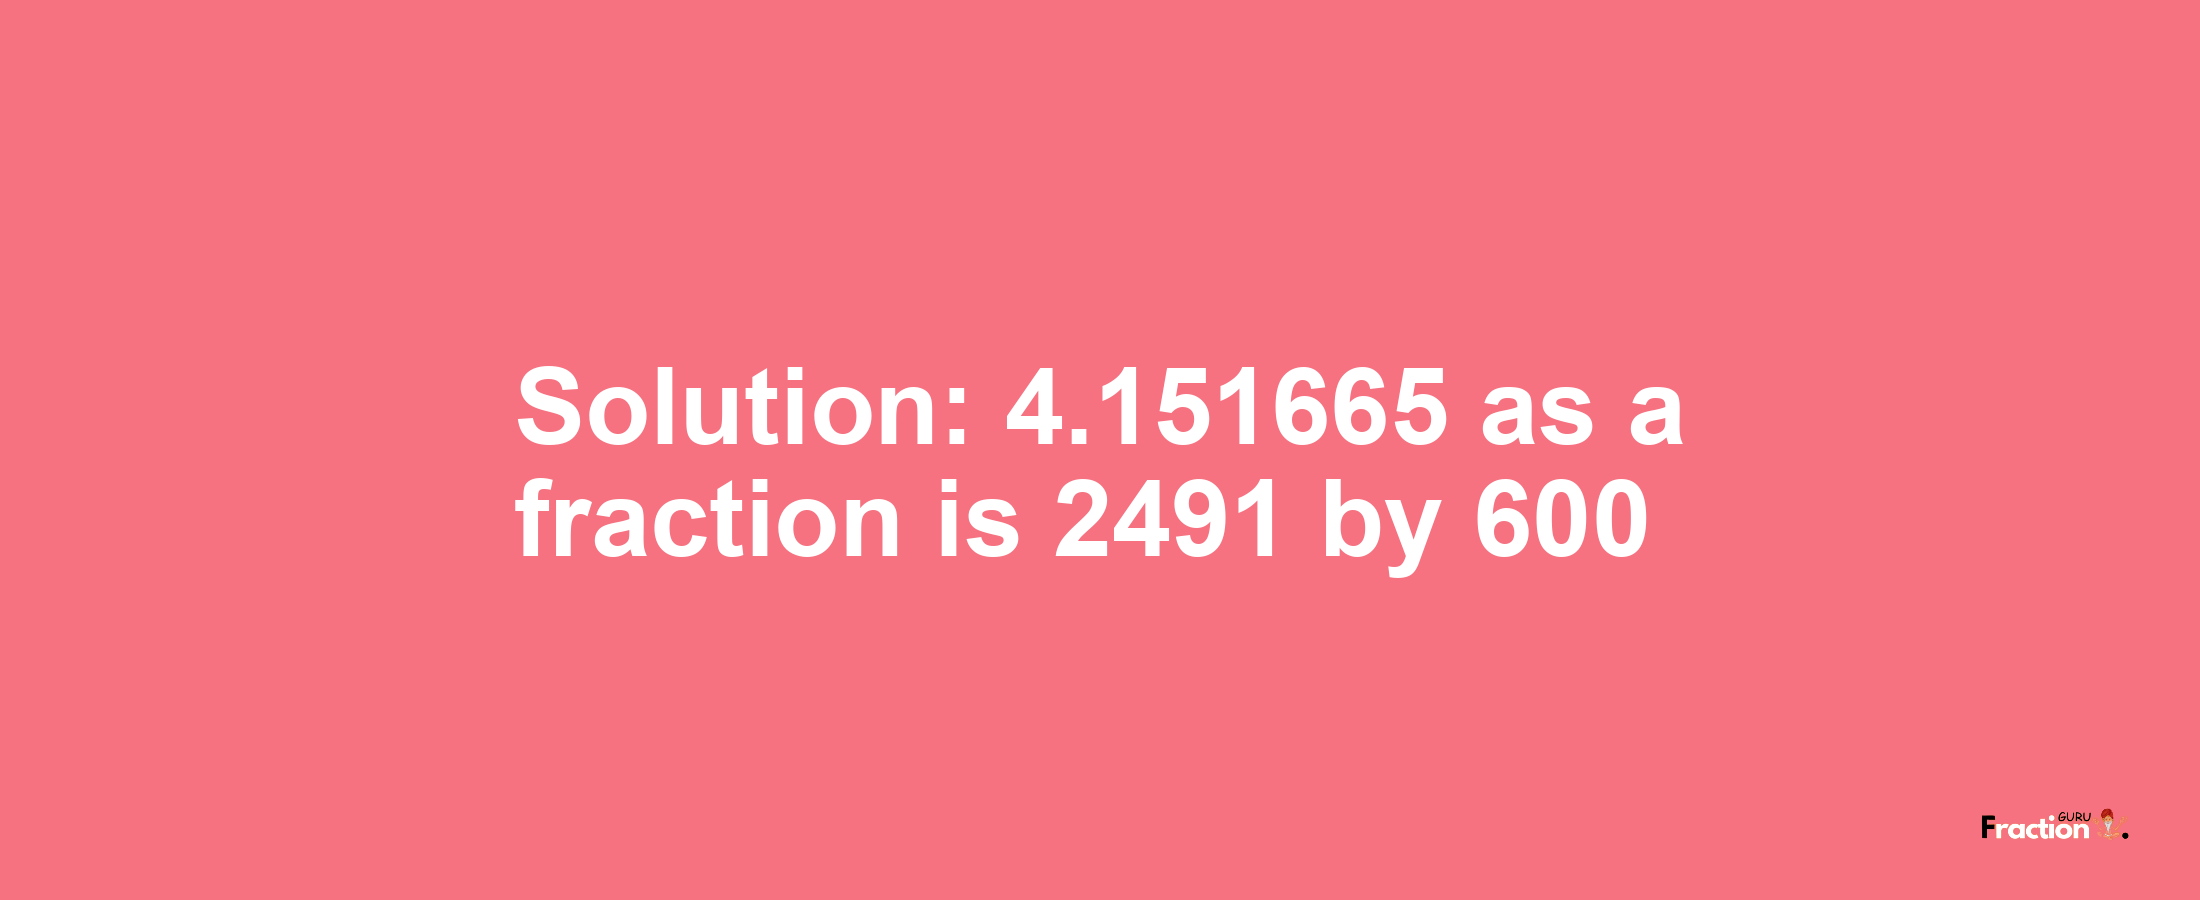 Solution:4.151665 as a fraction is 2491/600